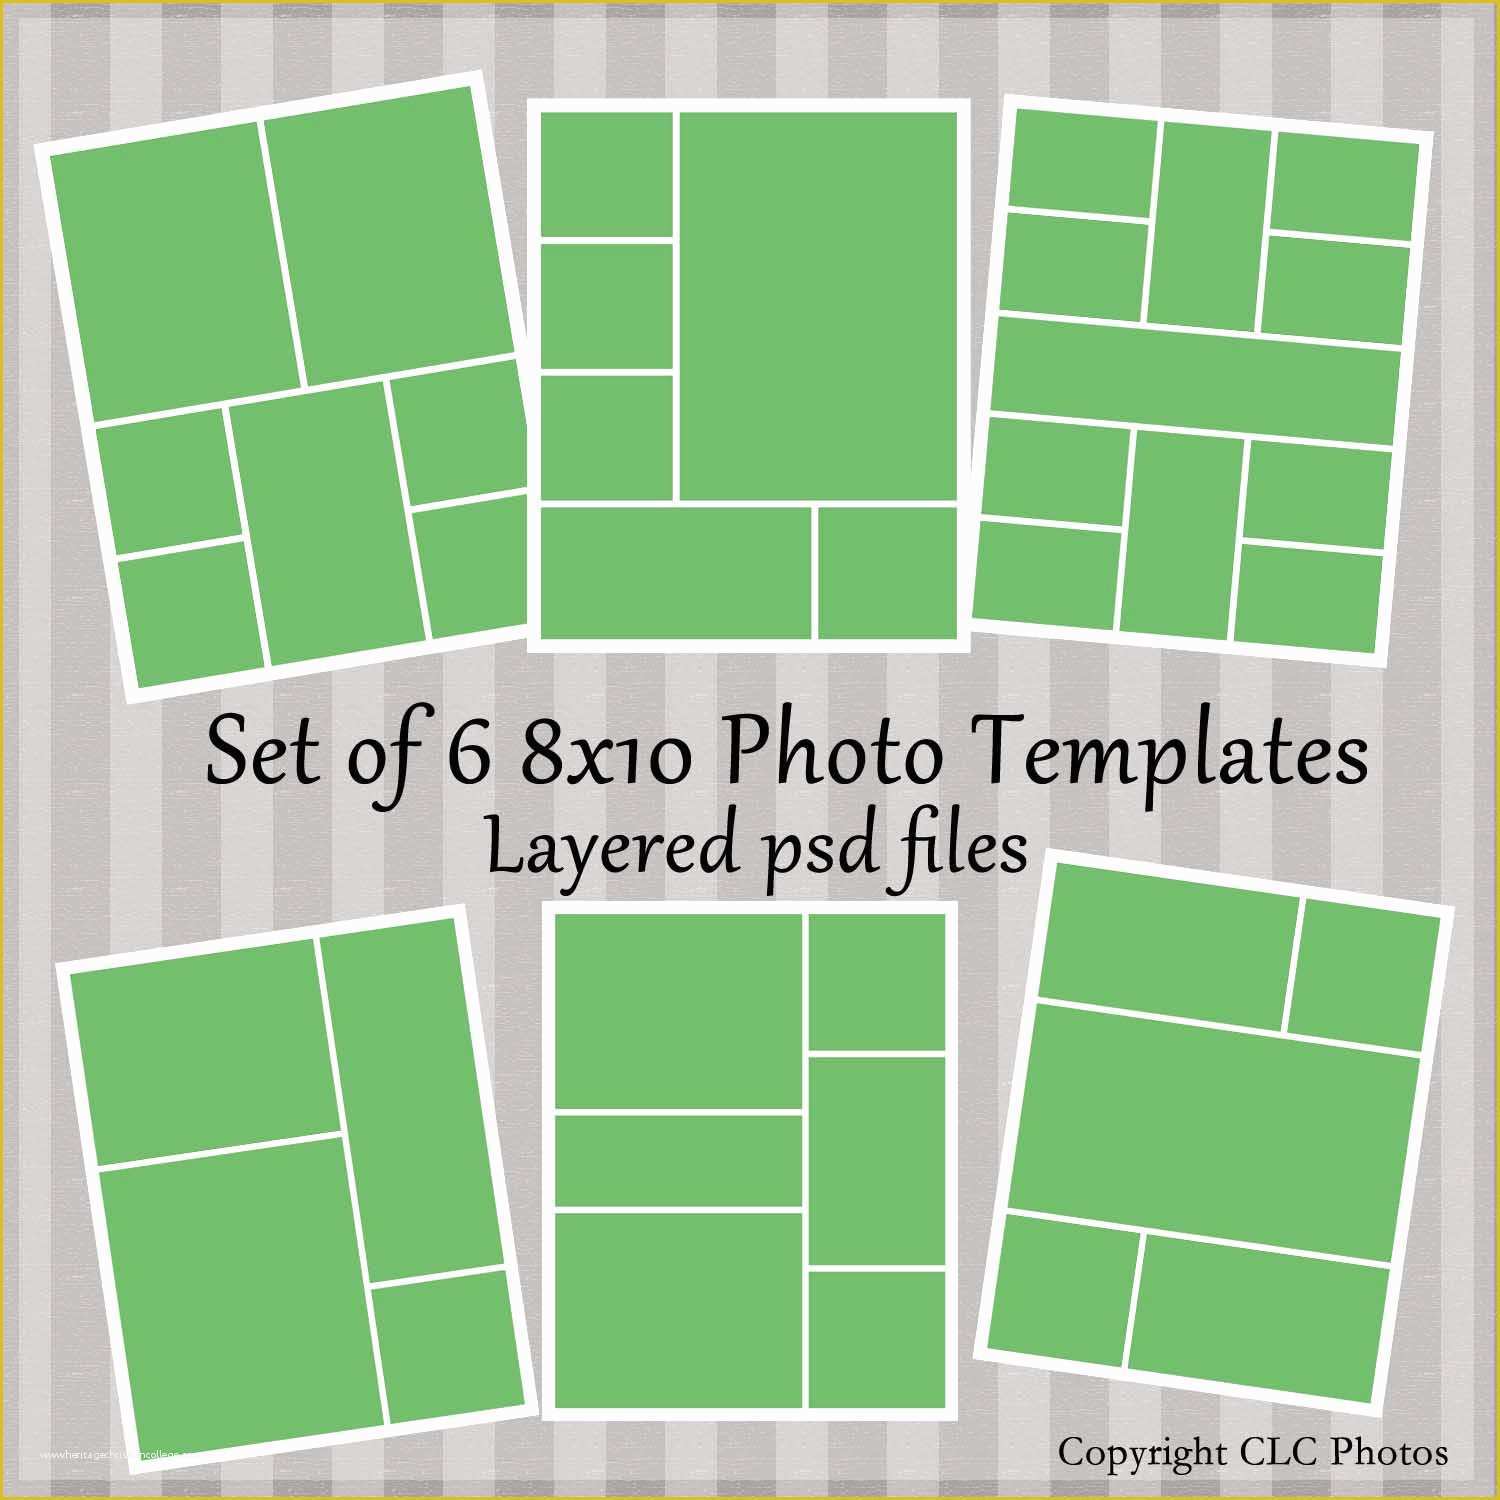 Free Photo Collage Templates Of 8x10 Template Collage Story Board Layered Psd Files Set